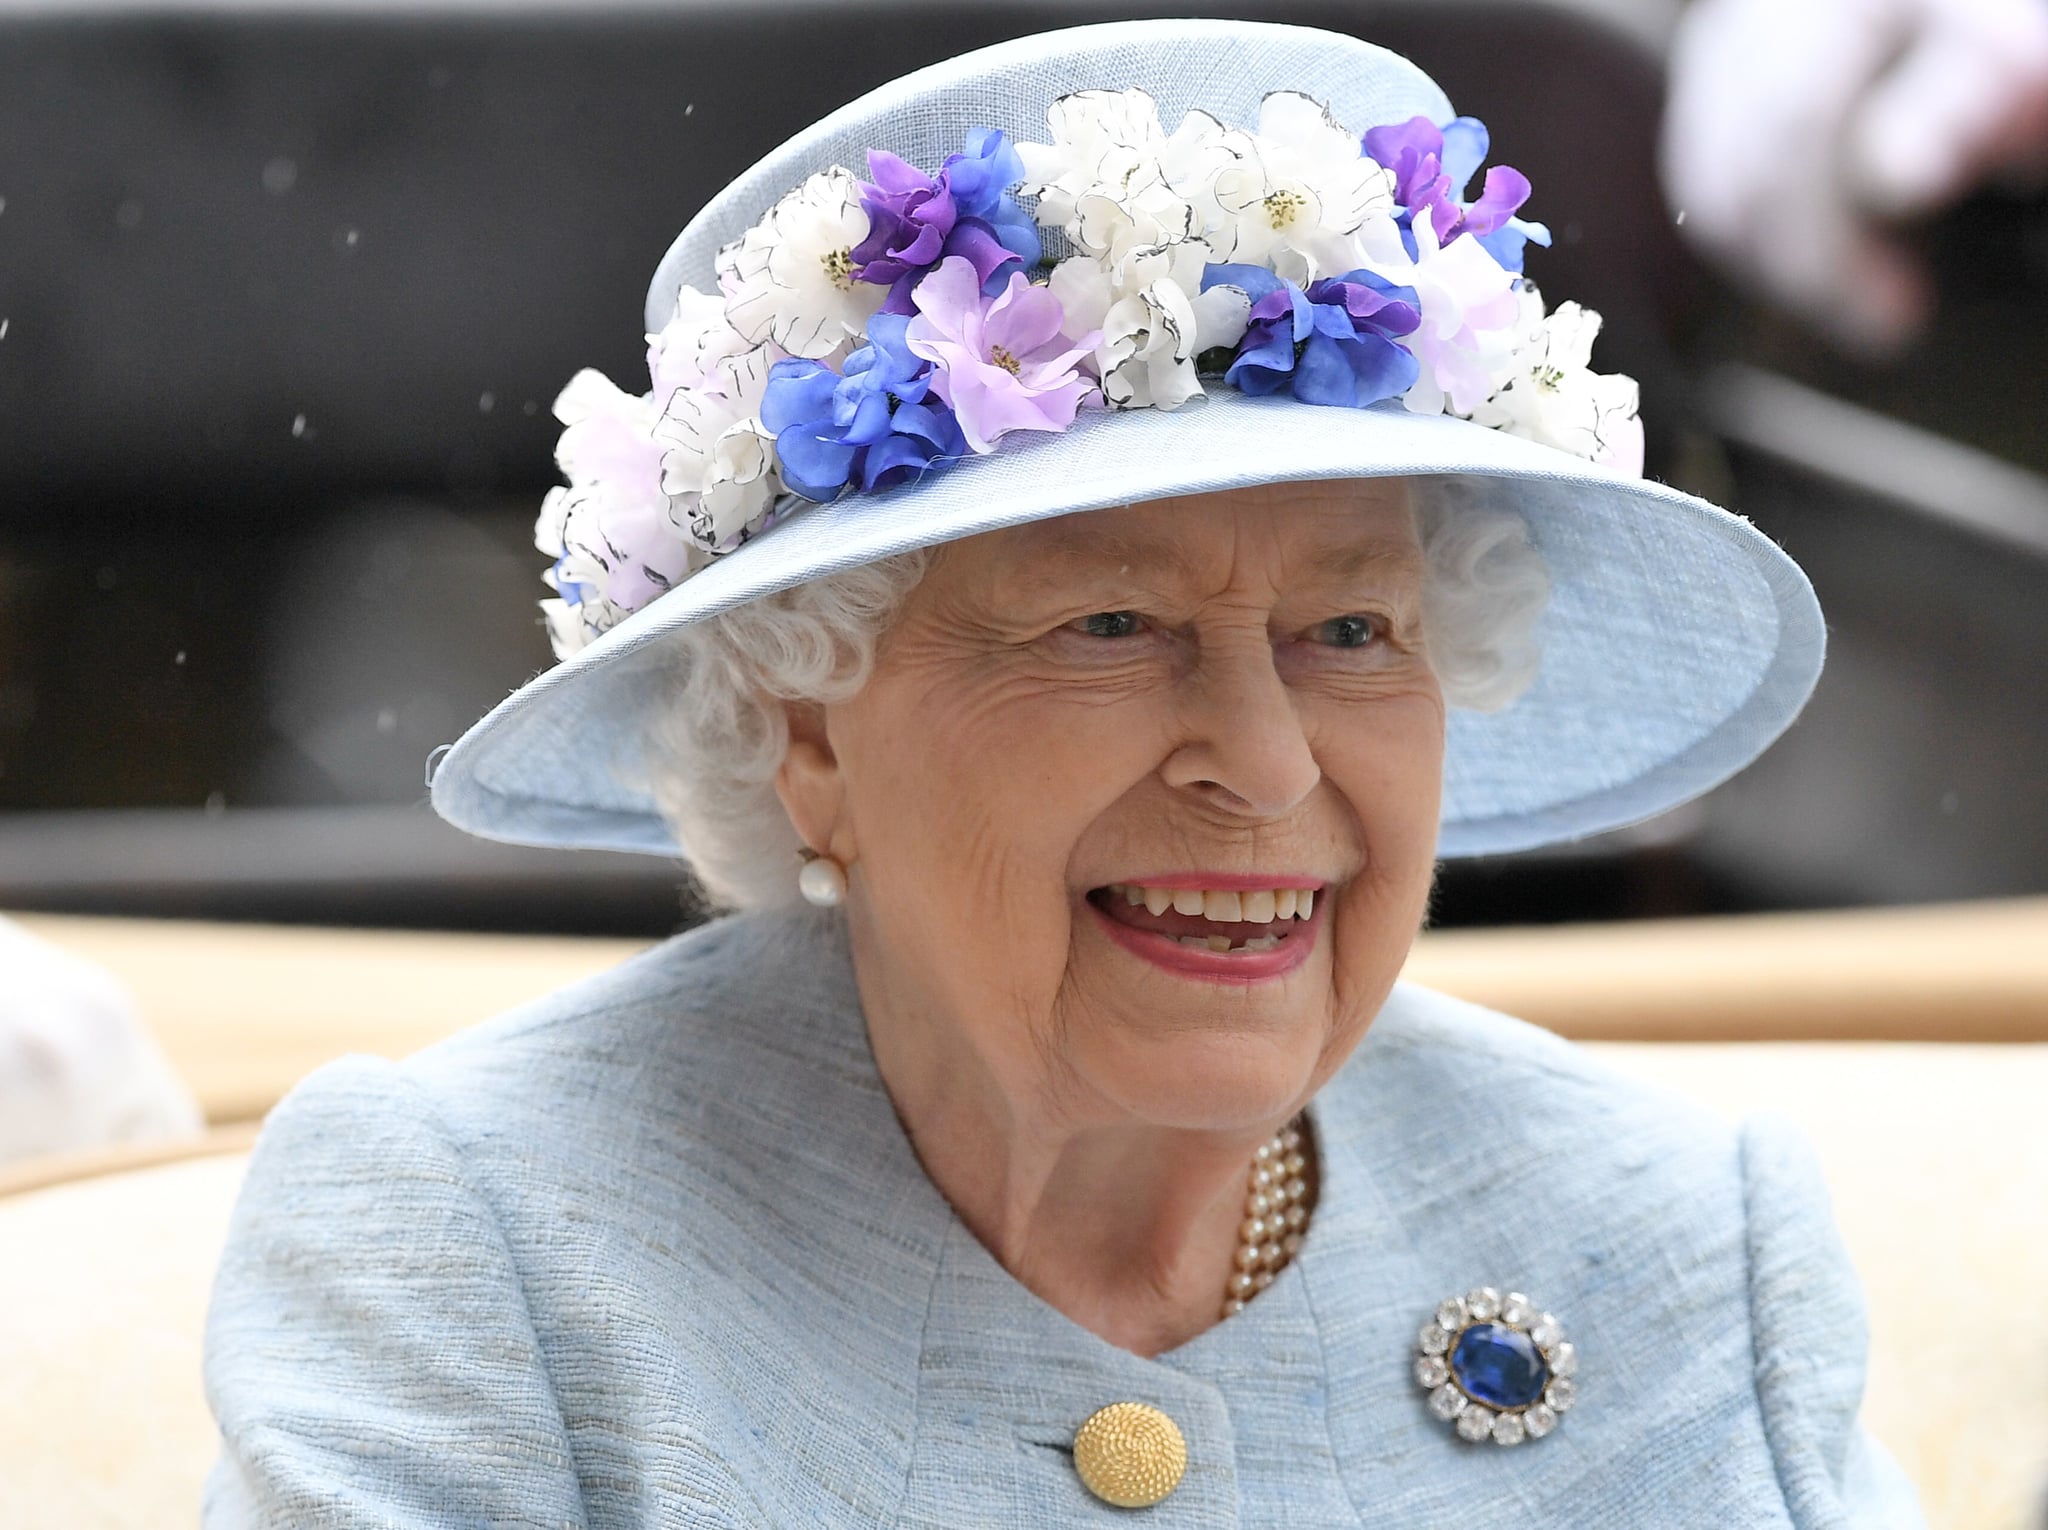 TOPSHOT - Britain's Queen Elizabeth II arrives by carriage on day two of the Royal Ascot horse racing meet, in Ascot, west of London, on June 19, 2019. - The five-day meeting is one of the highlights of the horse racing calendar. Horse racing has been held at the famous Berkshire course since 1711 and tradition is a hallmark of the meeting. Top hats and tails remain compulsory in parts of the course while a daily procession of horse-drawn carriages brings the Queen to the course. (Photo by Daniel LEAL-OLIVAS / AFP)        (Photo credit should read DANIEL LEAL-OLIVAS/AFP/Getty Images)